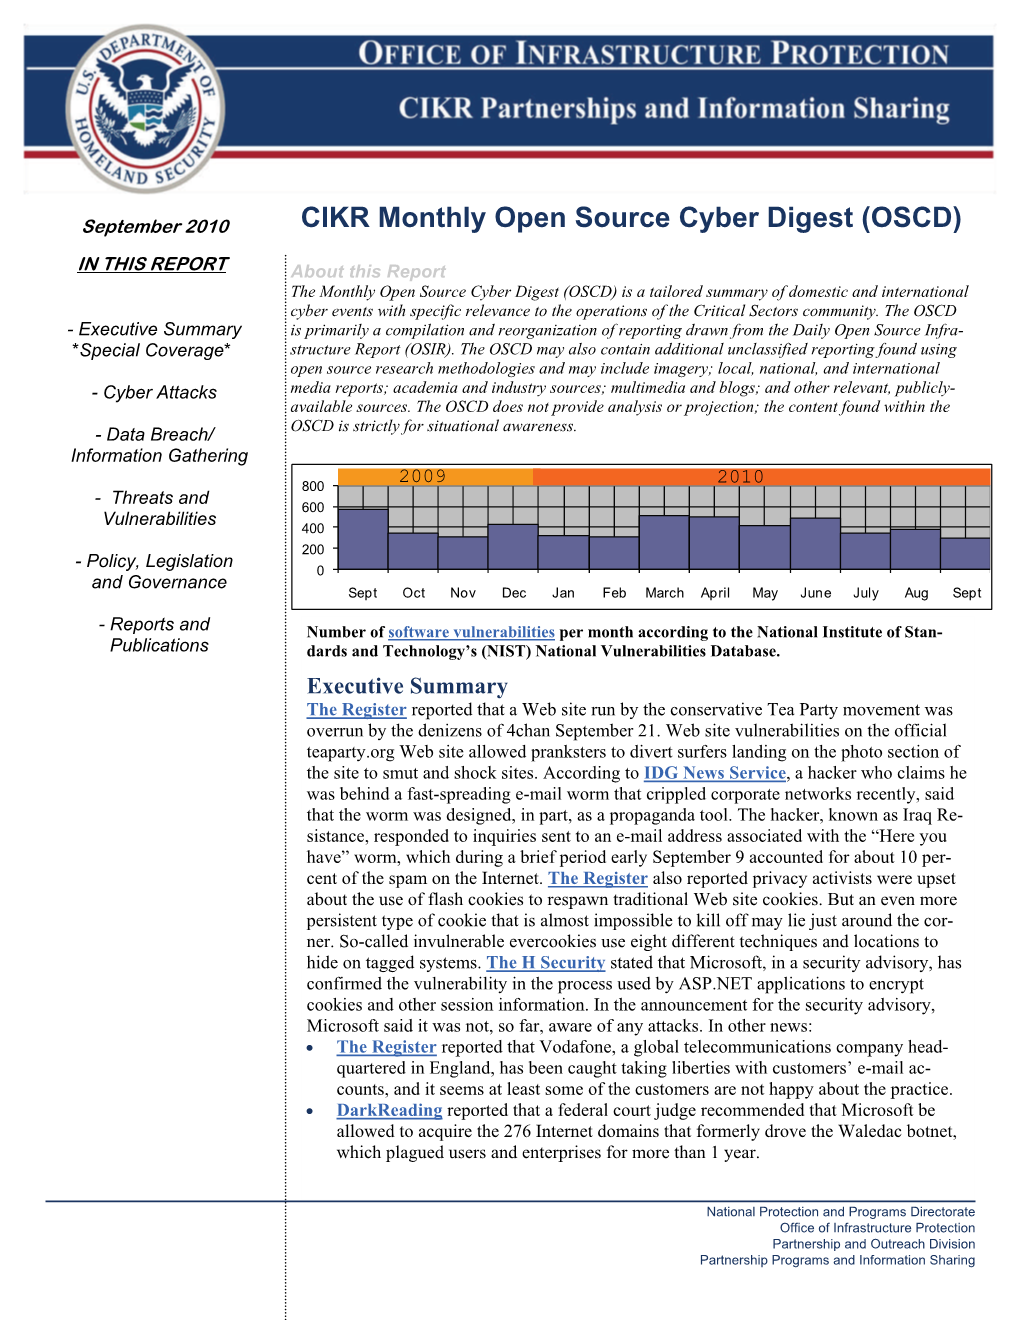 Department of Homeland Security Cyber Digest